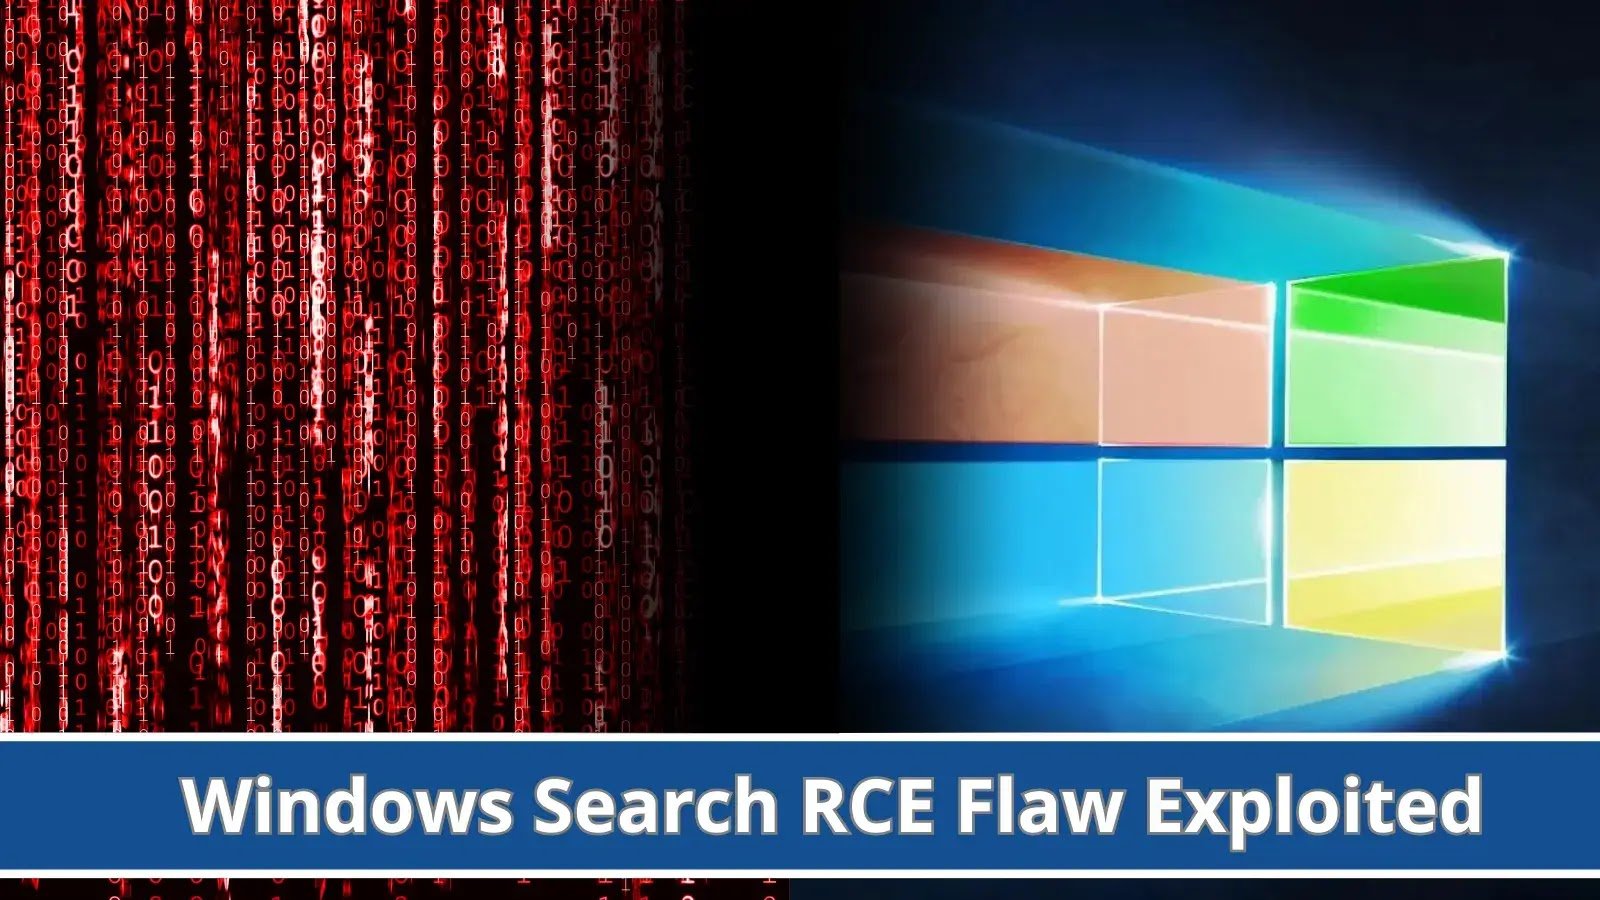 Hackers using Weaponized Office Document to Exploit Windows Search RCE